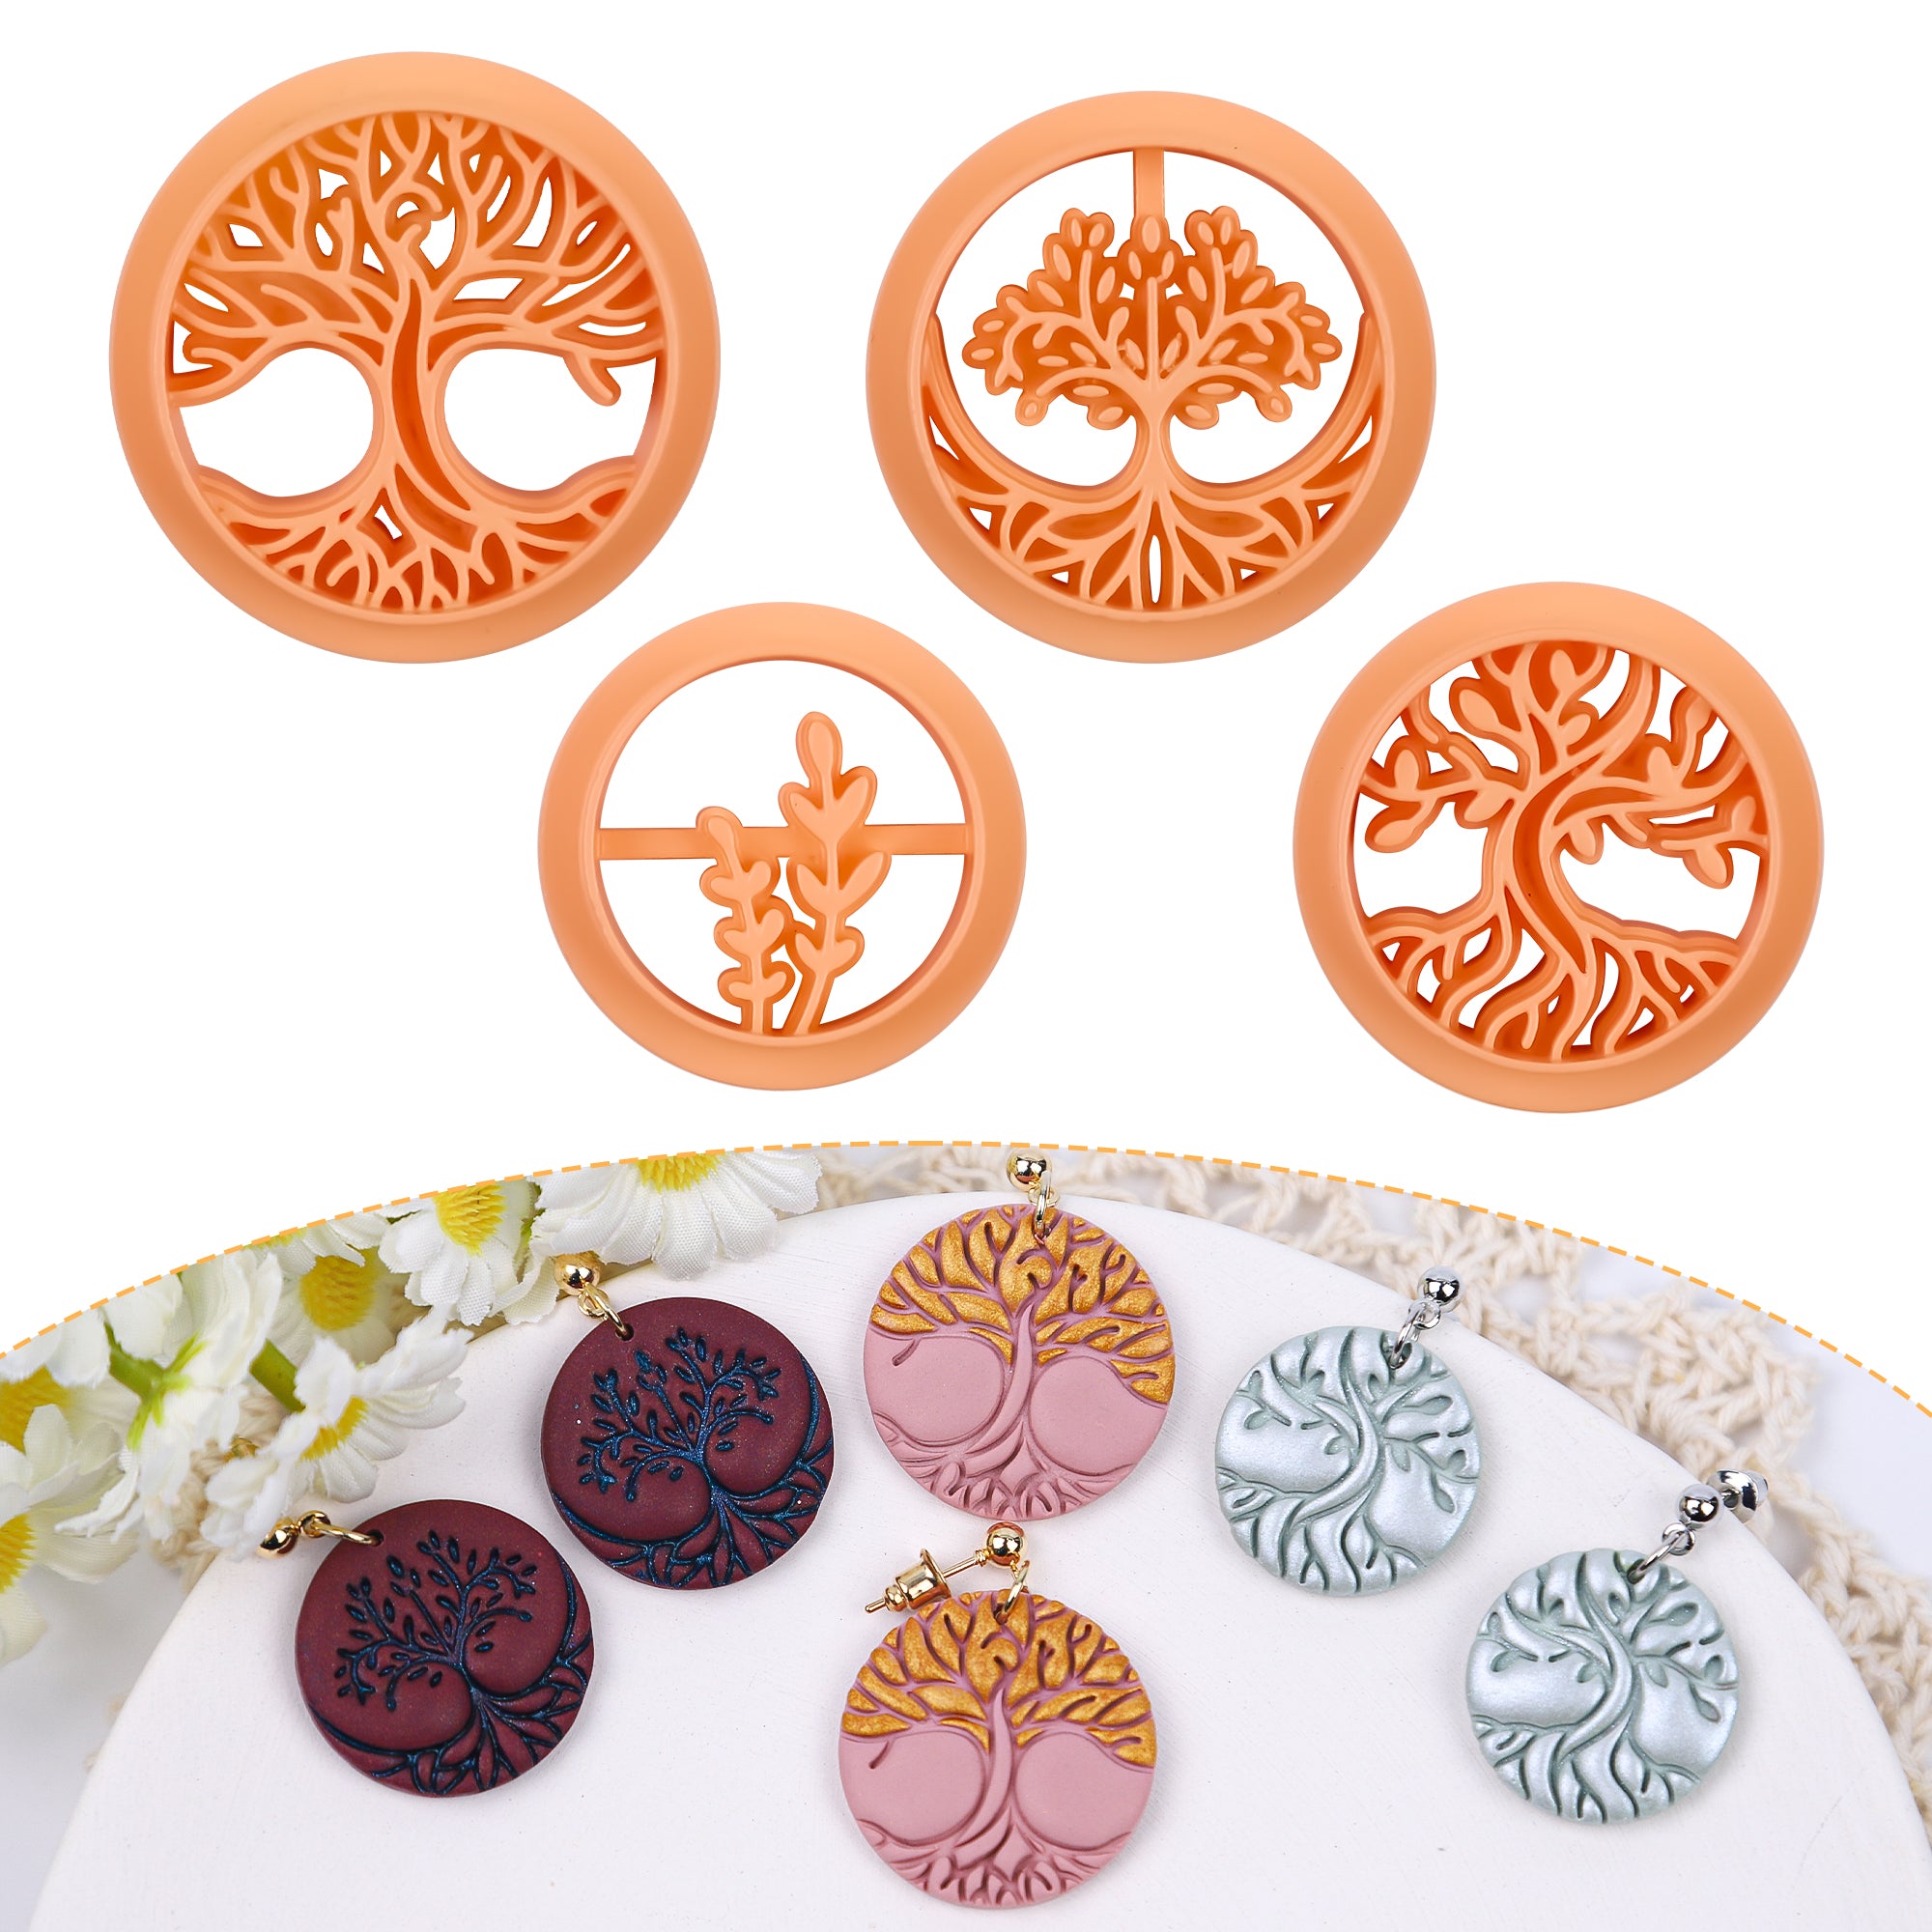  Puocaon Transfer Paper Polymer Clay - 4 Design 20 Pcs